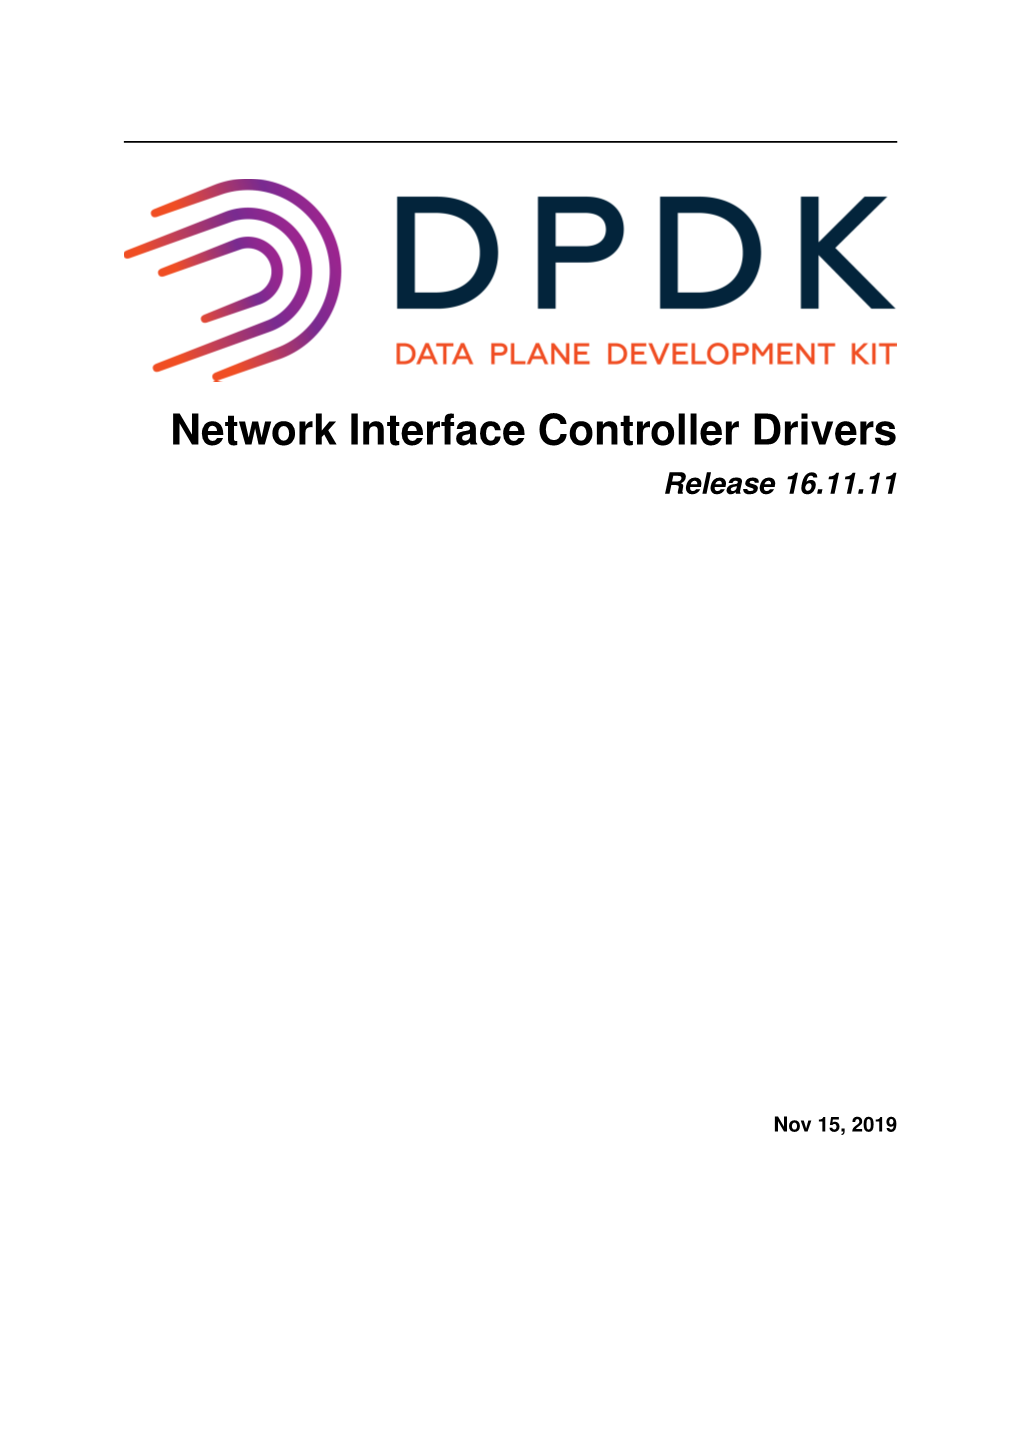 Network Interface Controller Drivers Release 16.11.11